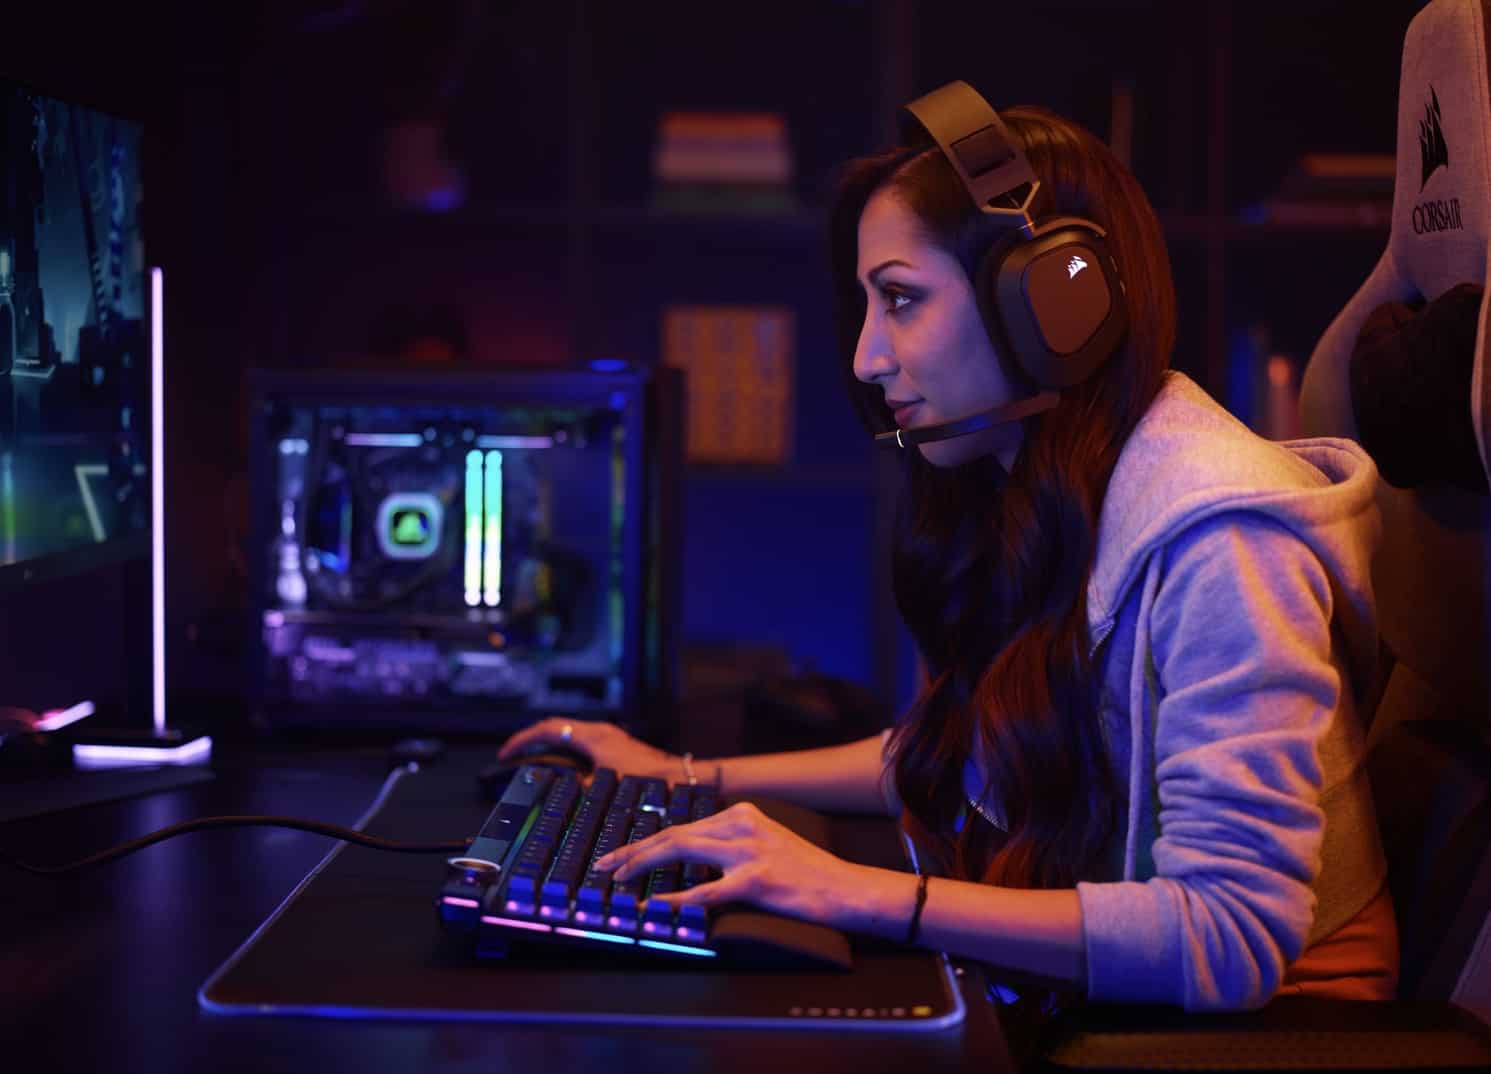 CORSAIR announced a new wireless gaming headset – the HS80 RGB WIRELESS